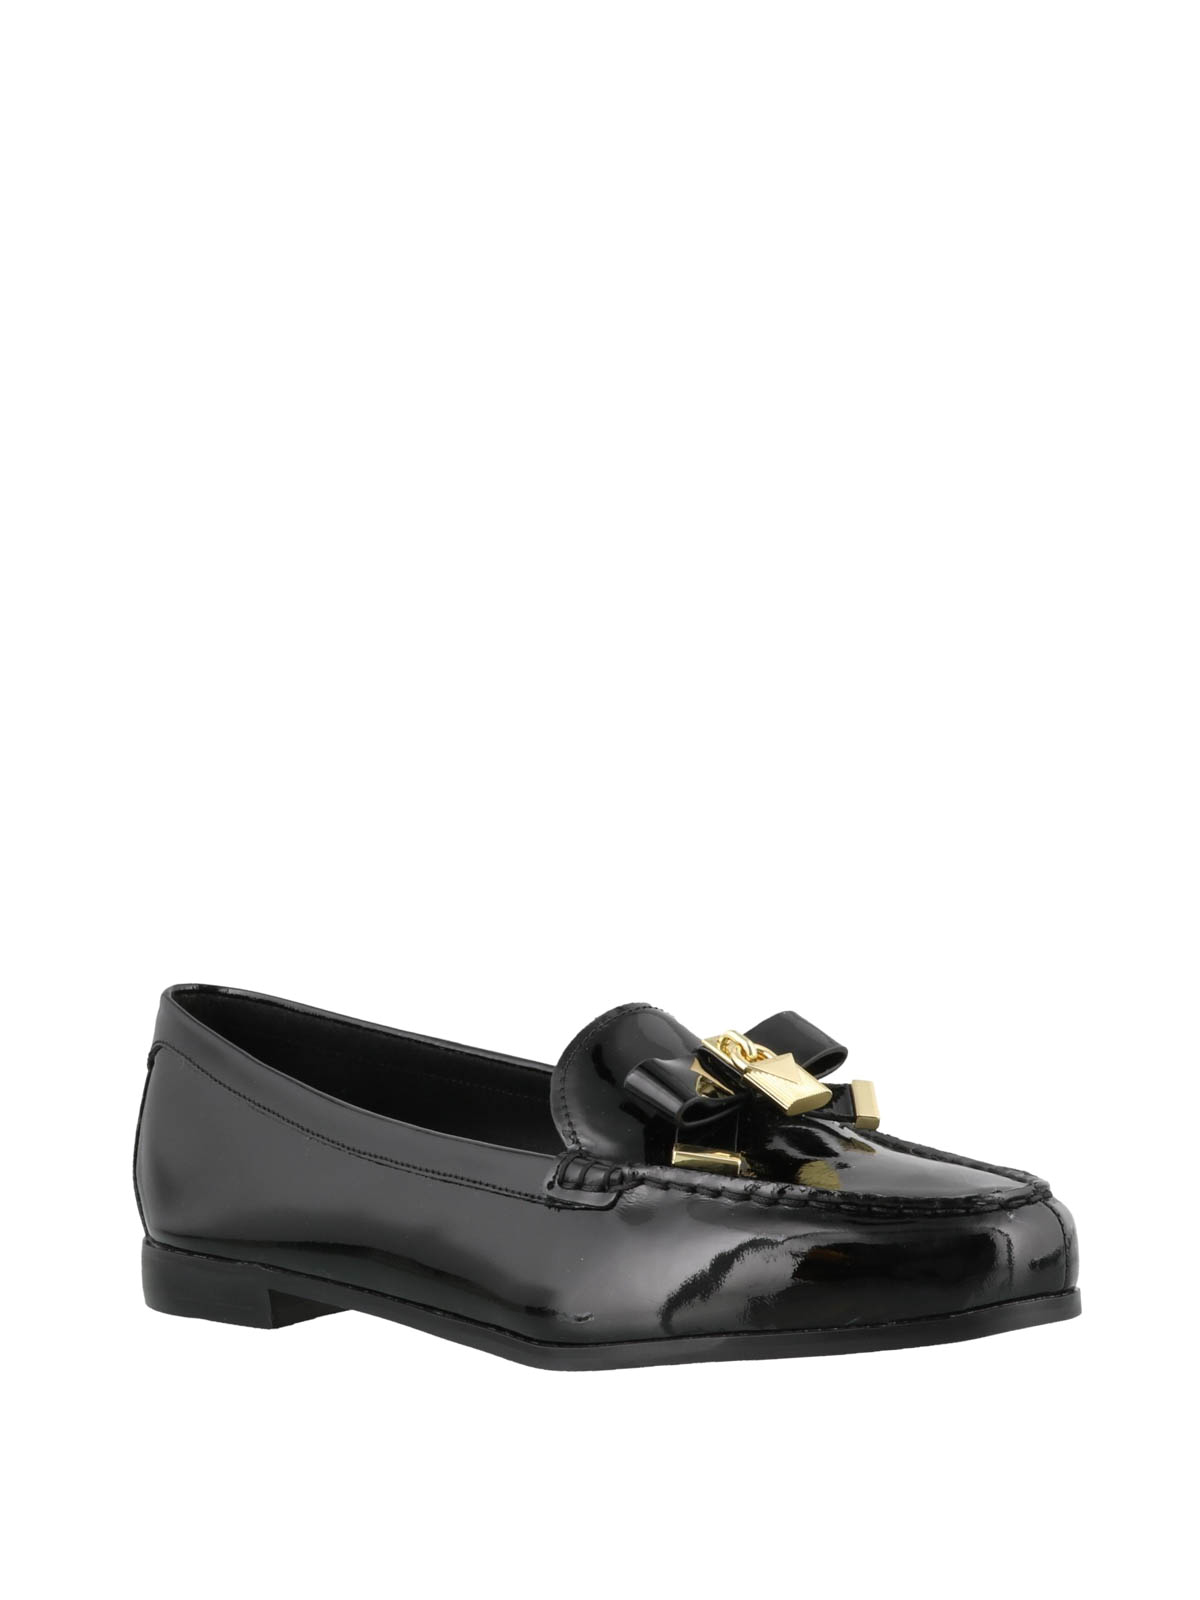 Loafers & Slippers Michael Kors - Bow and padlock detailed black loafers -  40R9ALFP1A001